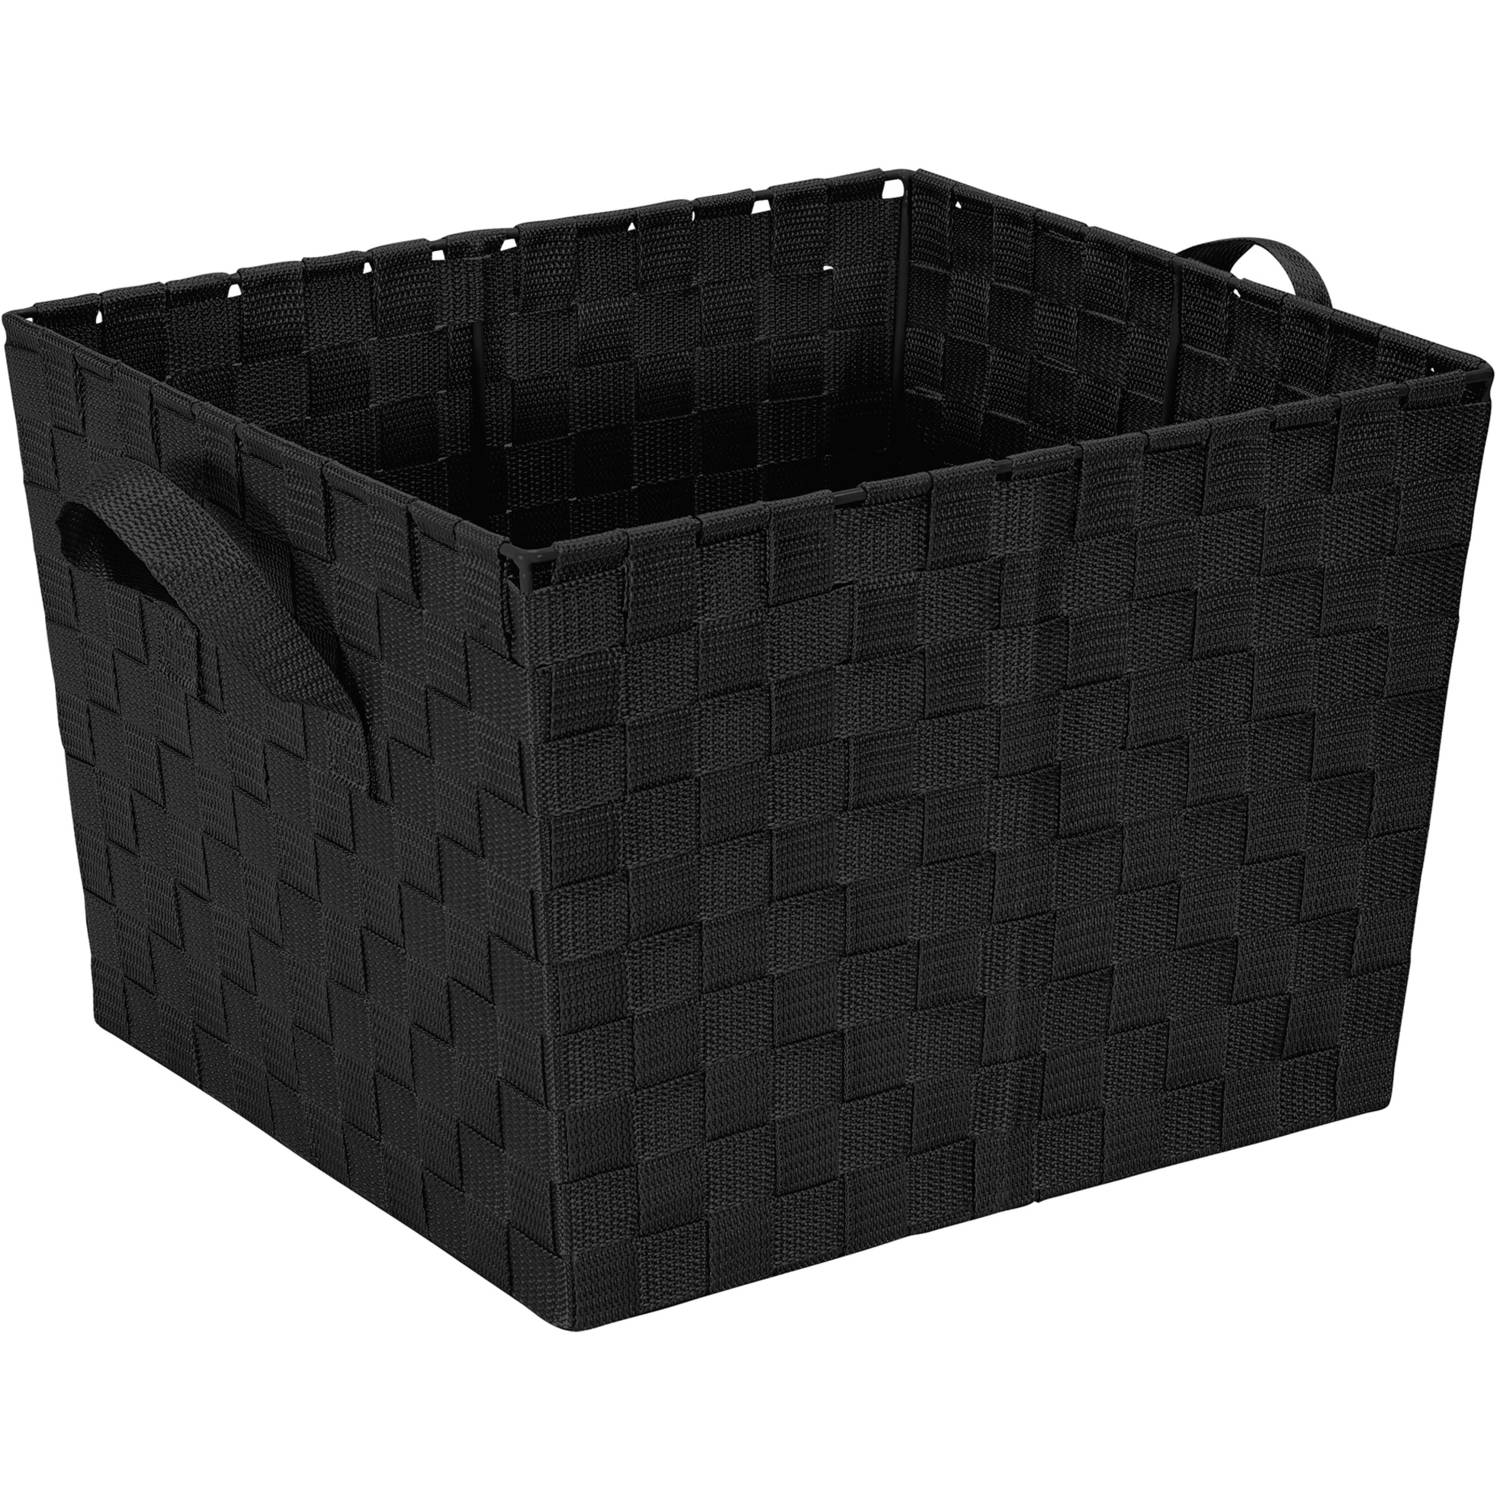 Simplify Large Woven Fabric Storage Basket in Black - image 1 of 8